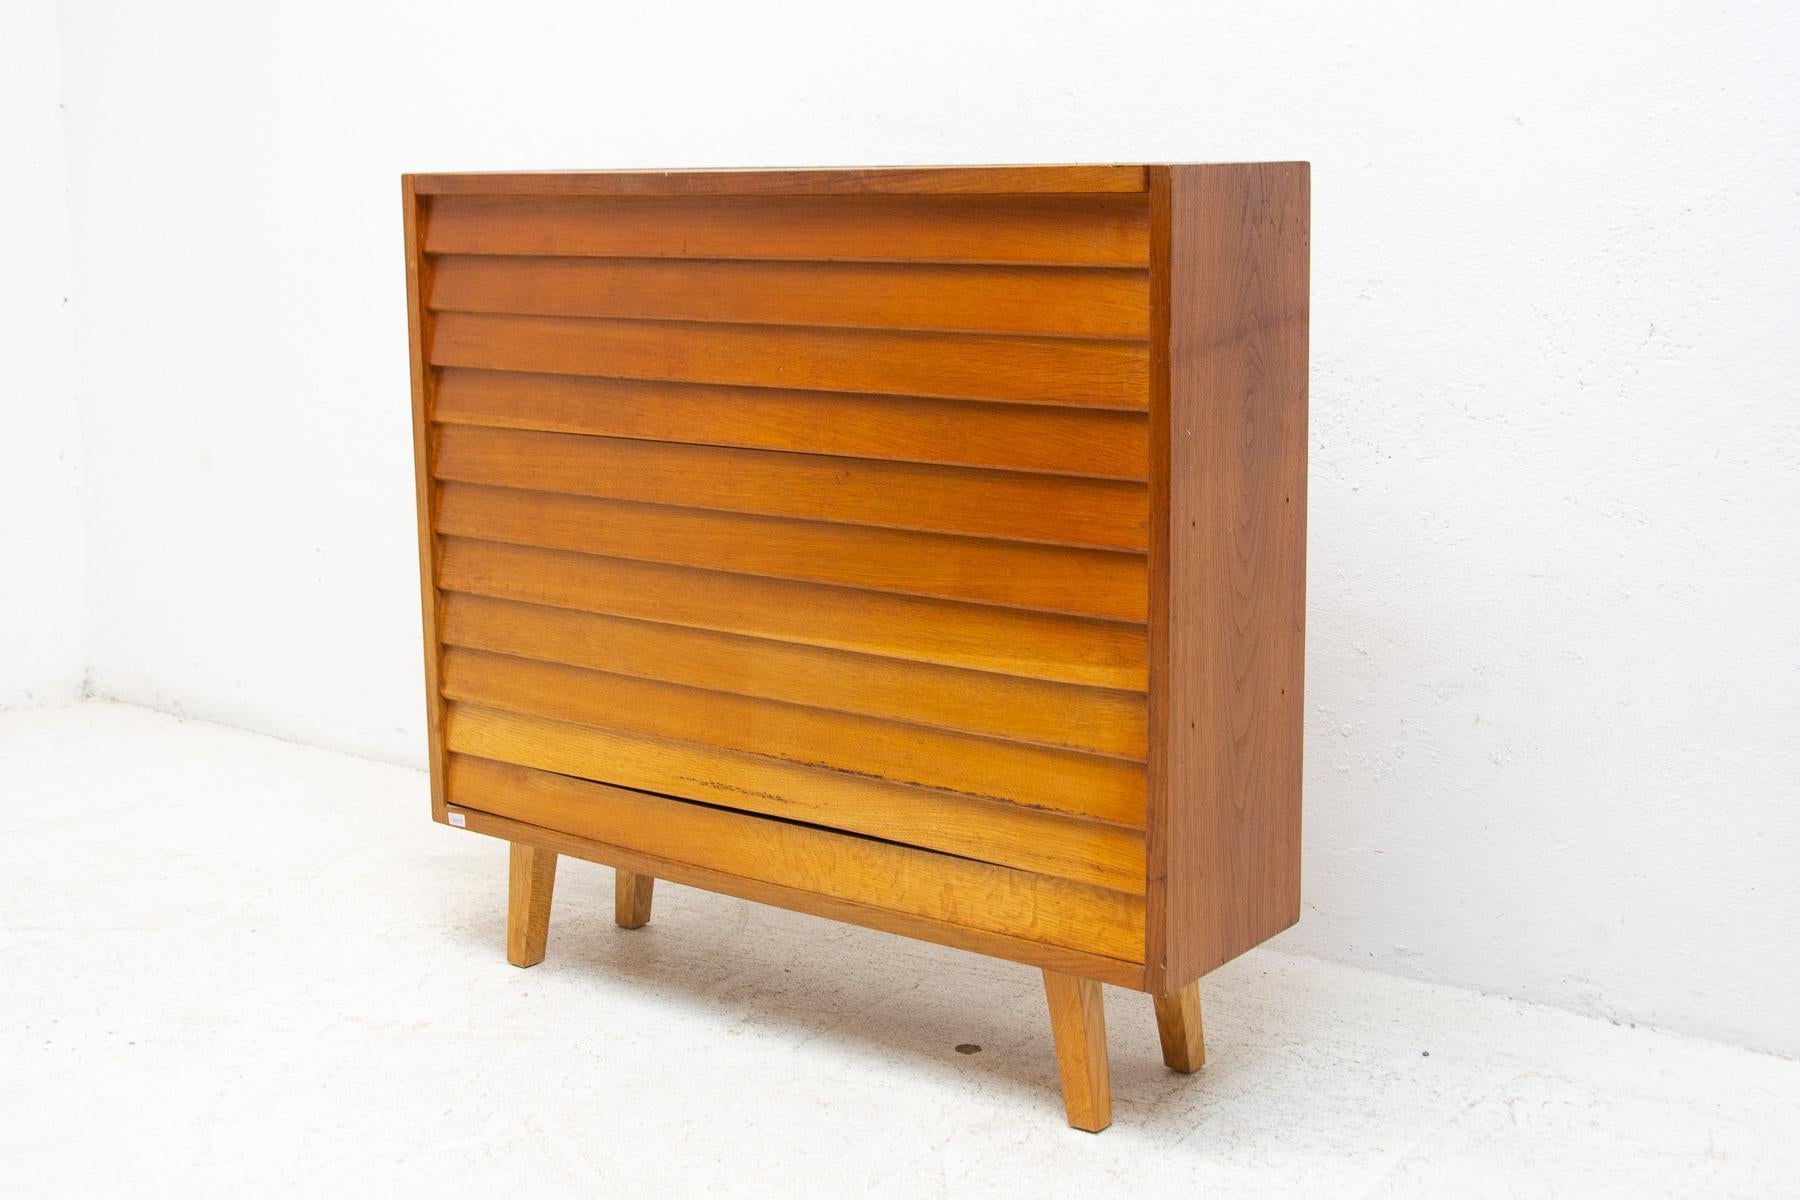 Vintage dresser(bedding cabinet) from the 60s of the last century. Made in the former Czechoslovakia. In good Vintage condition, showing signs of age and using(especially the top plate), the lower slats have a smaller gap between them, but this does